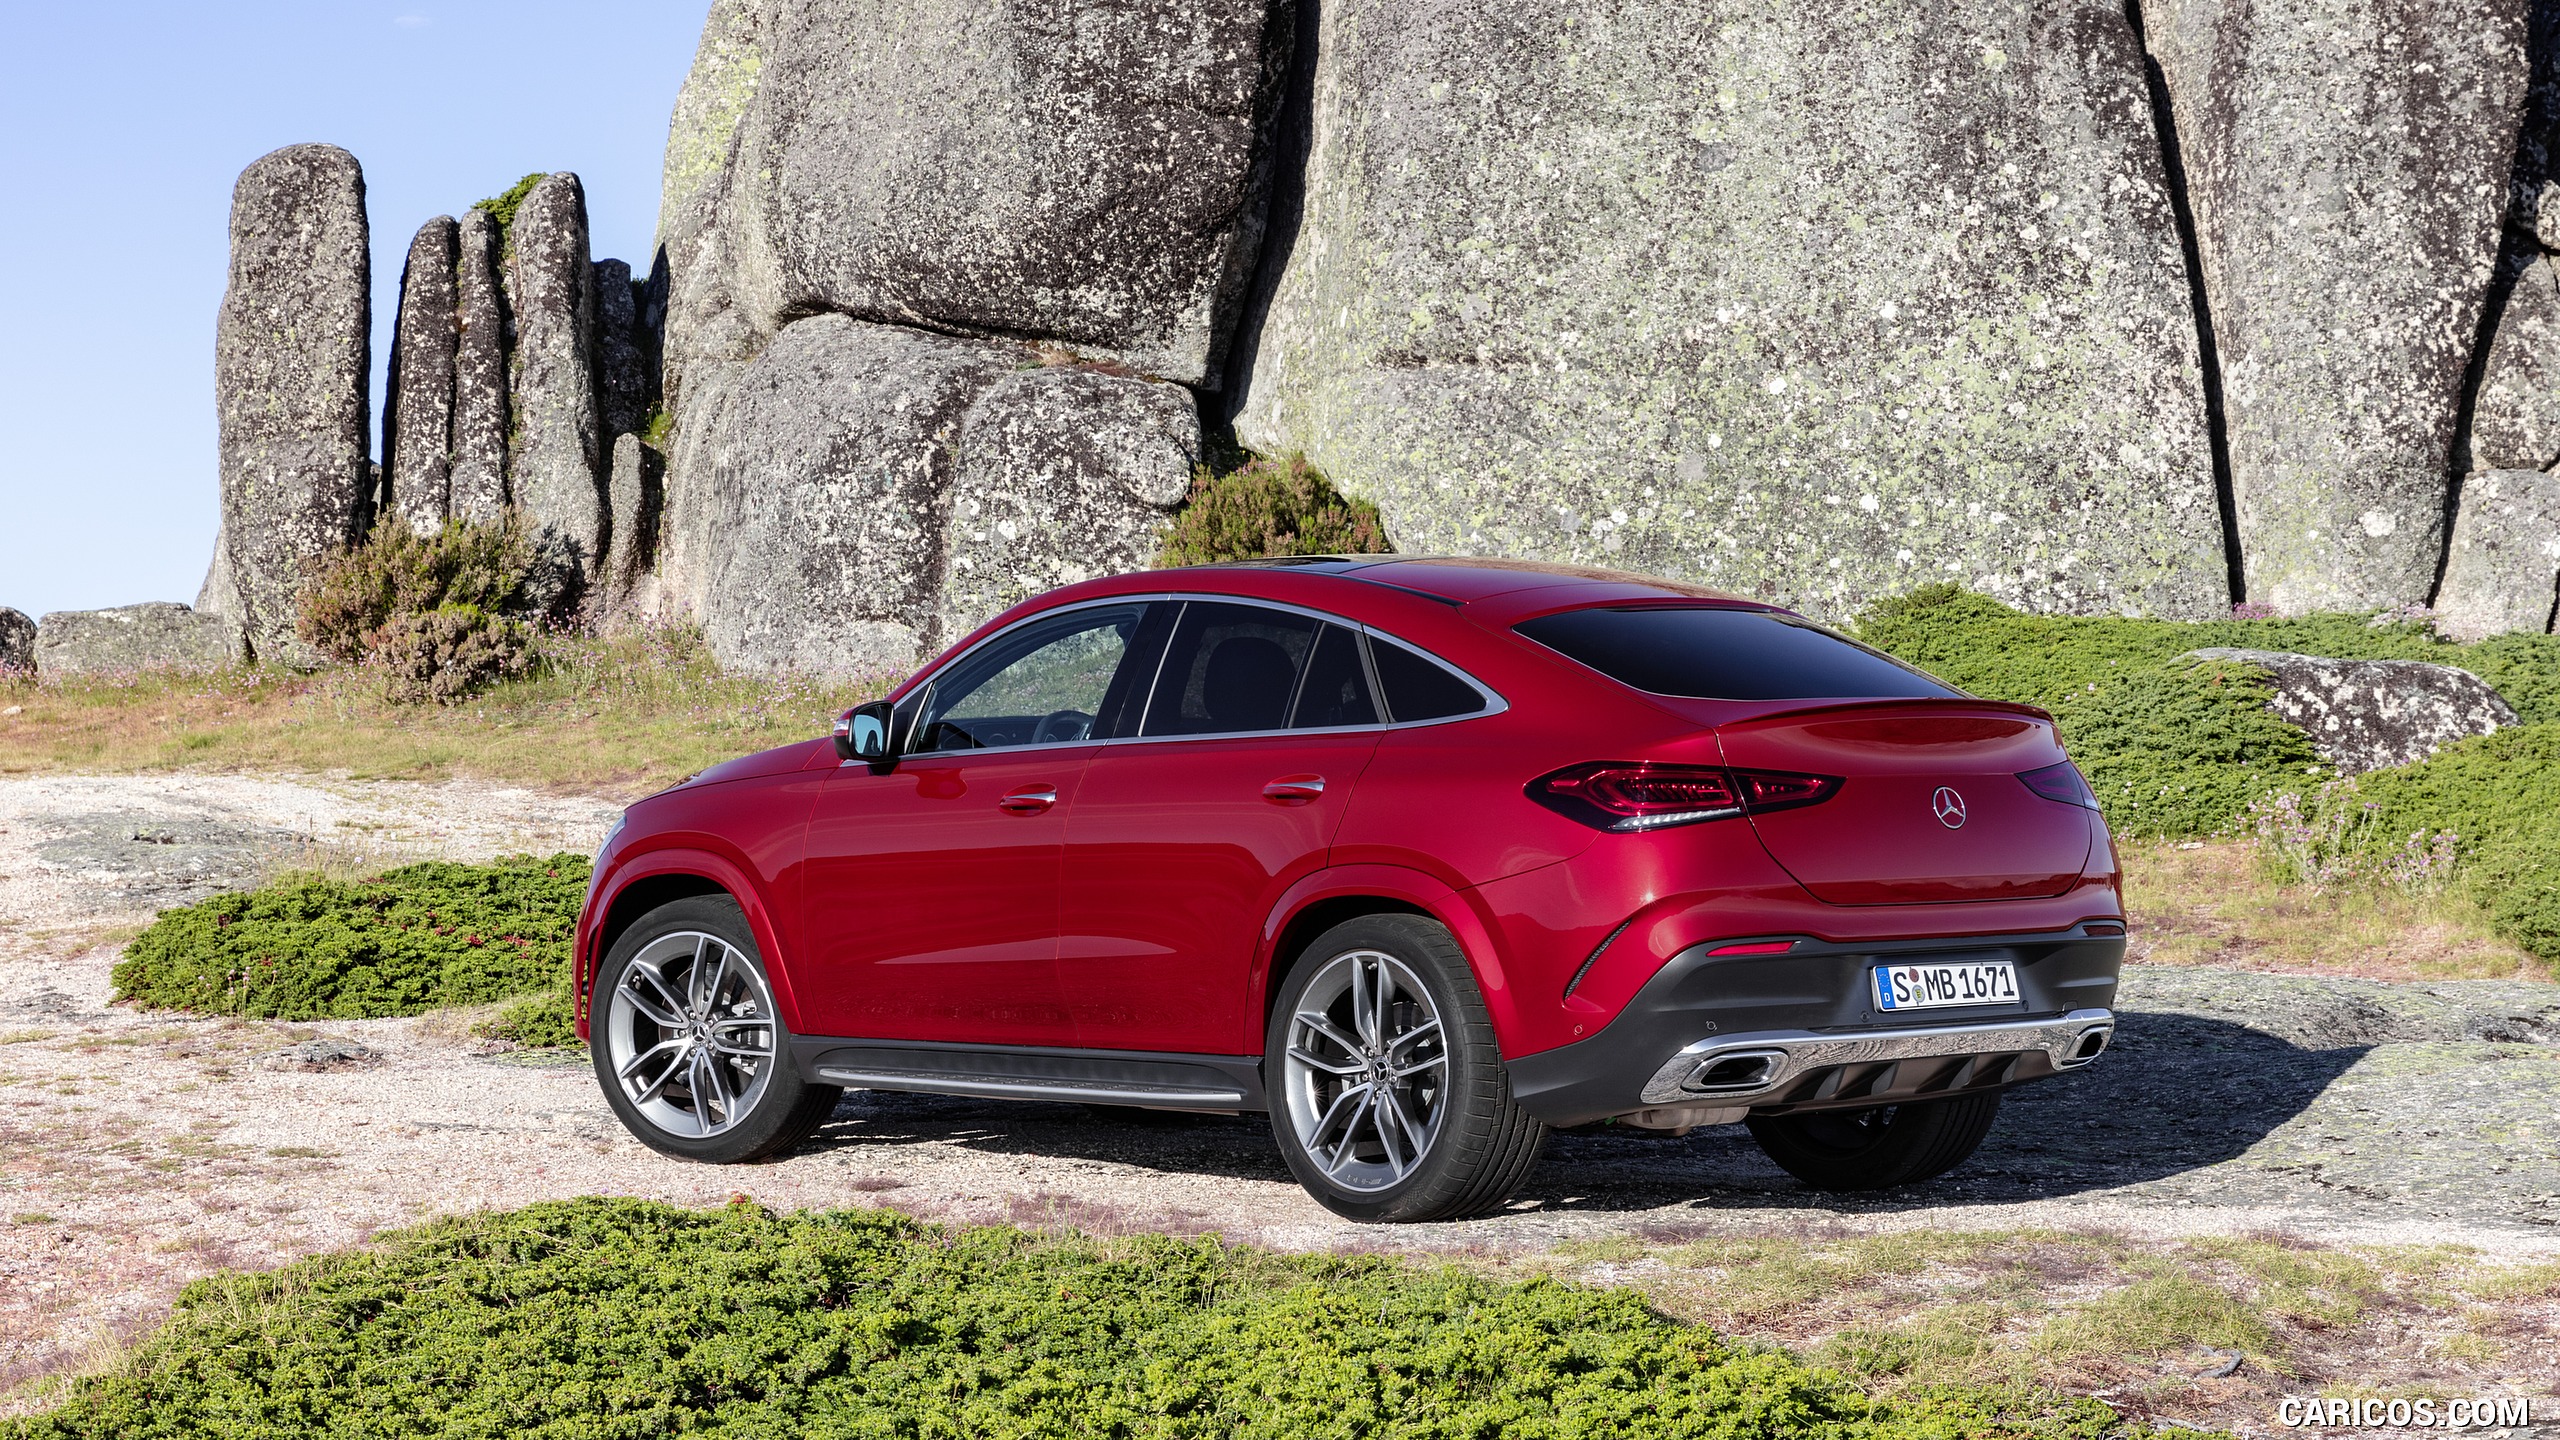 2021 Mercedes-Benz GLE Coupe (Color: Designo Hyacinth Red Metallic) - Rear Three-Quarter, #12 of 62